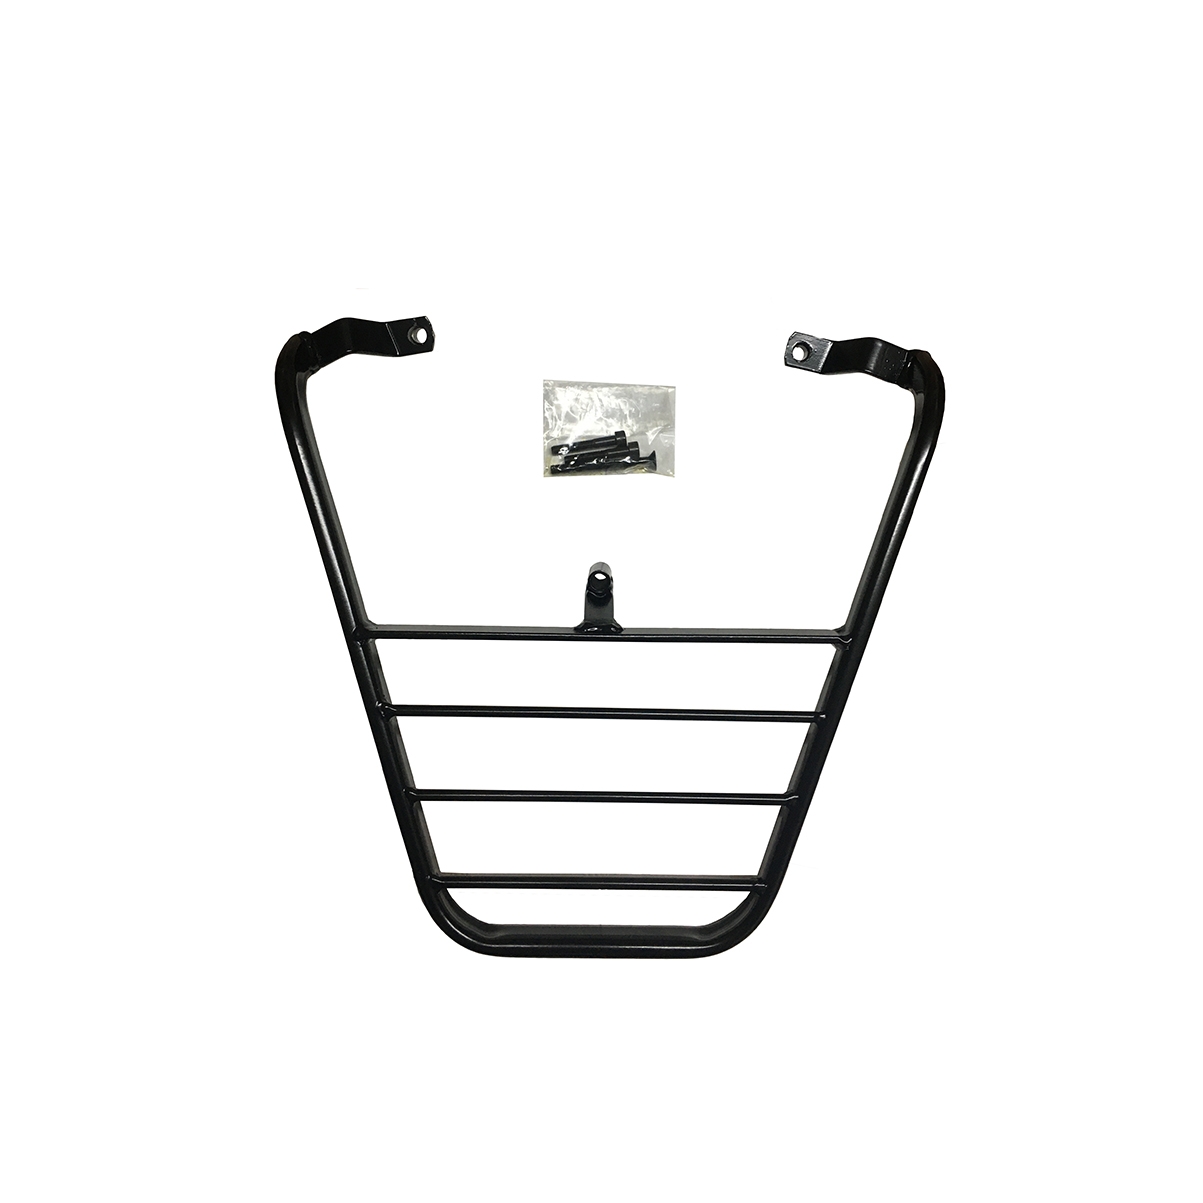 Motorcycle Accessories | Moto Discovery luggage rack for SYM Jet14 125 ...